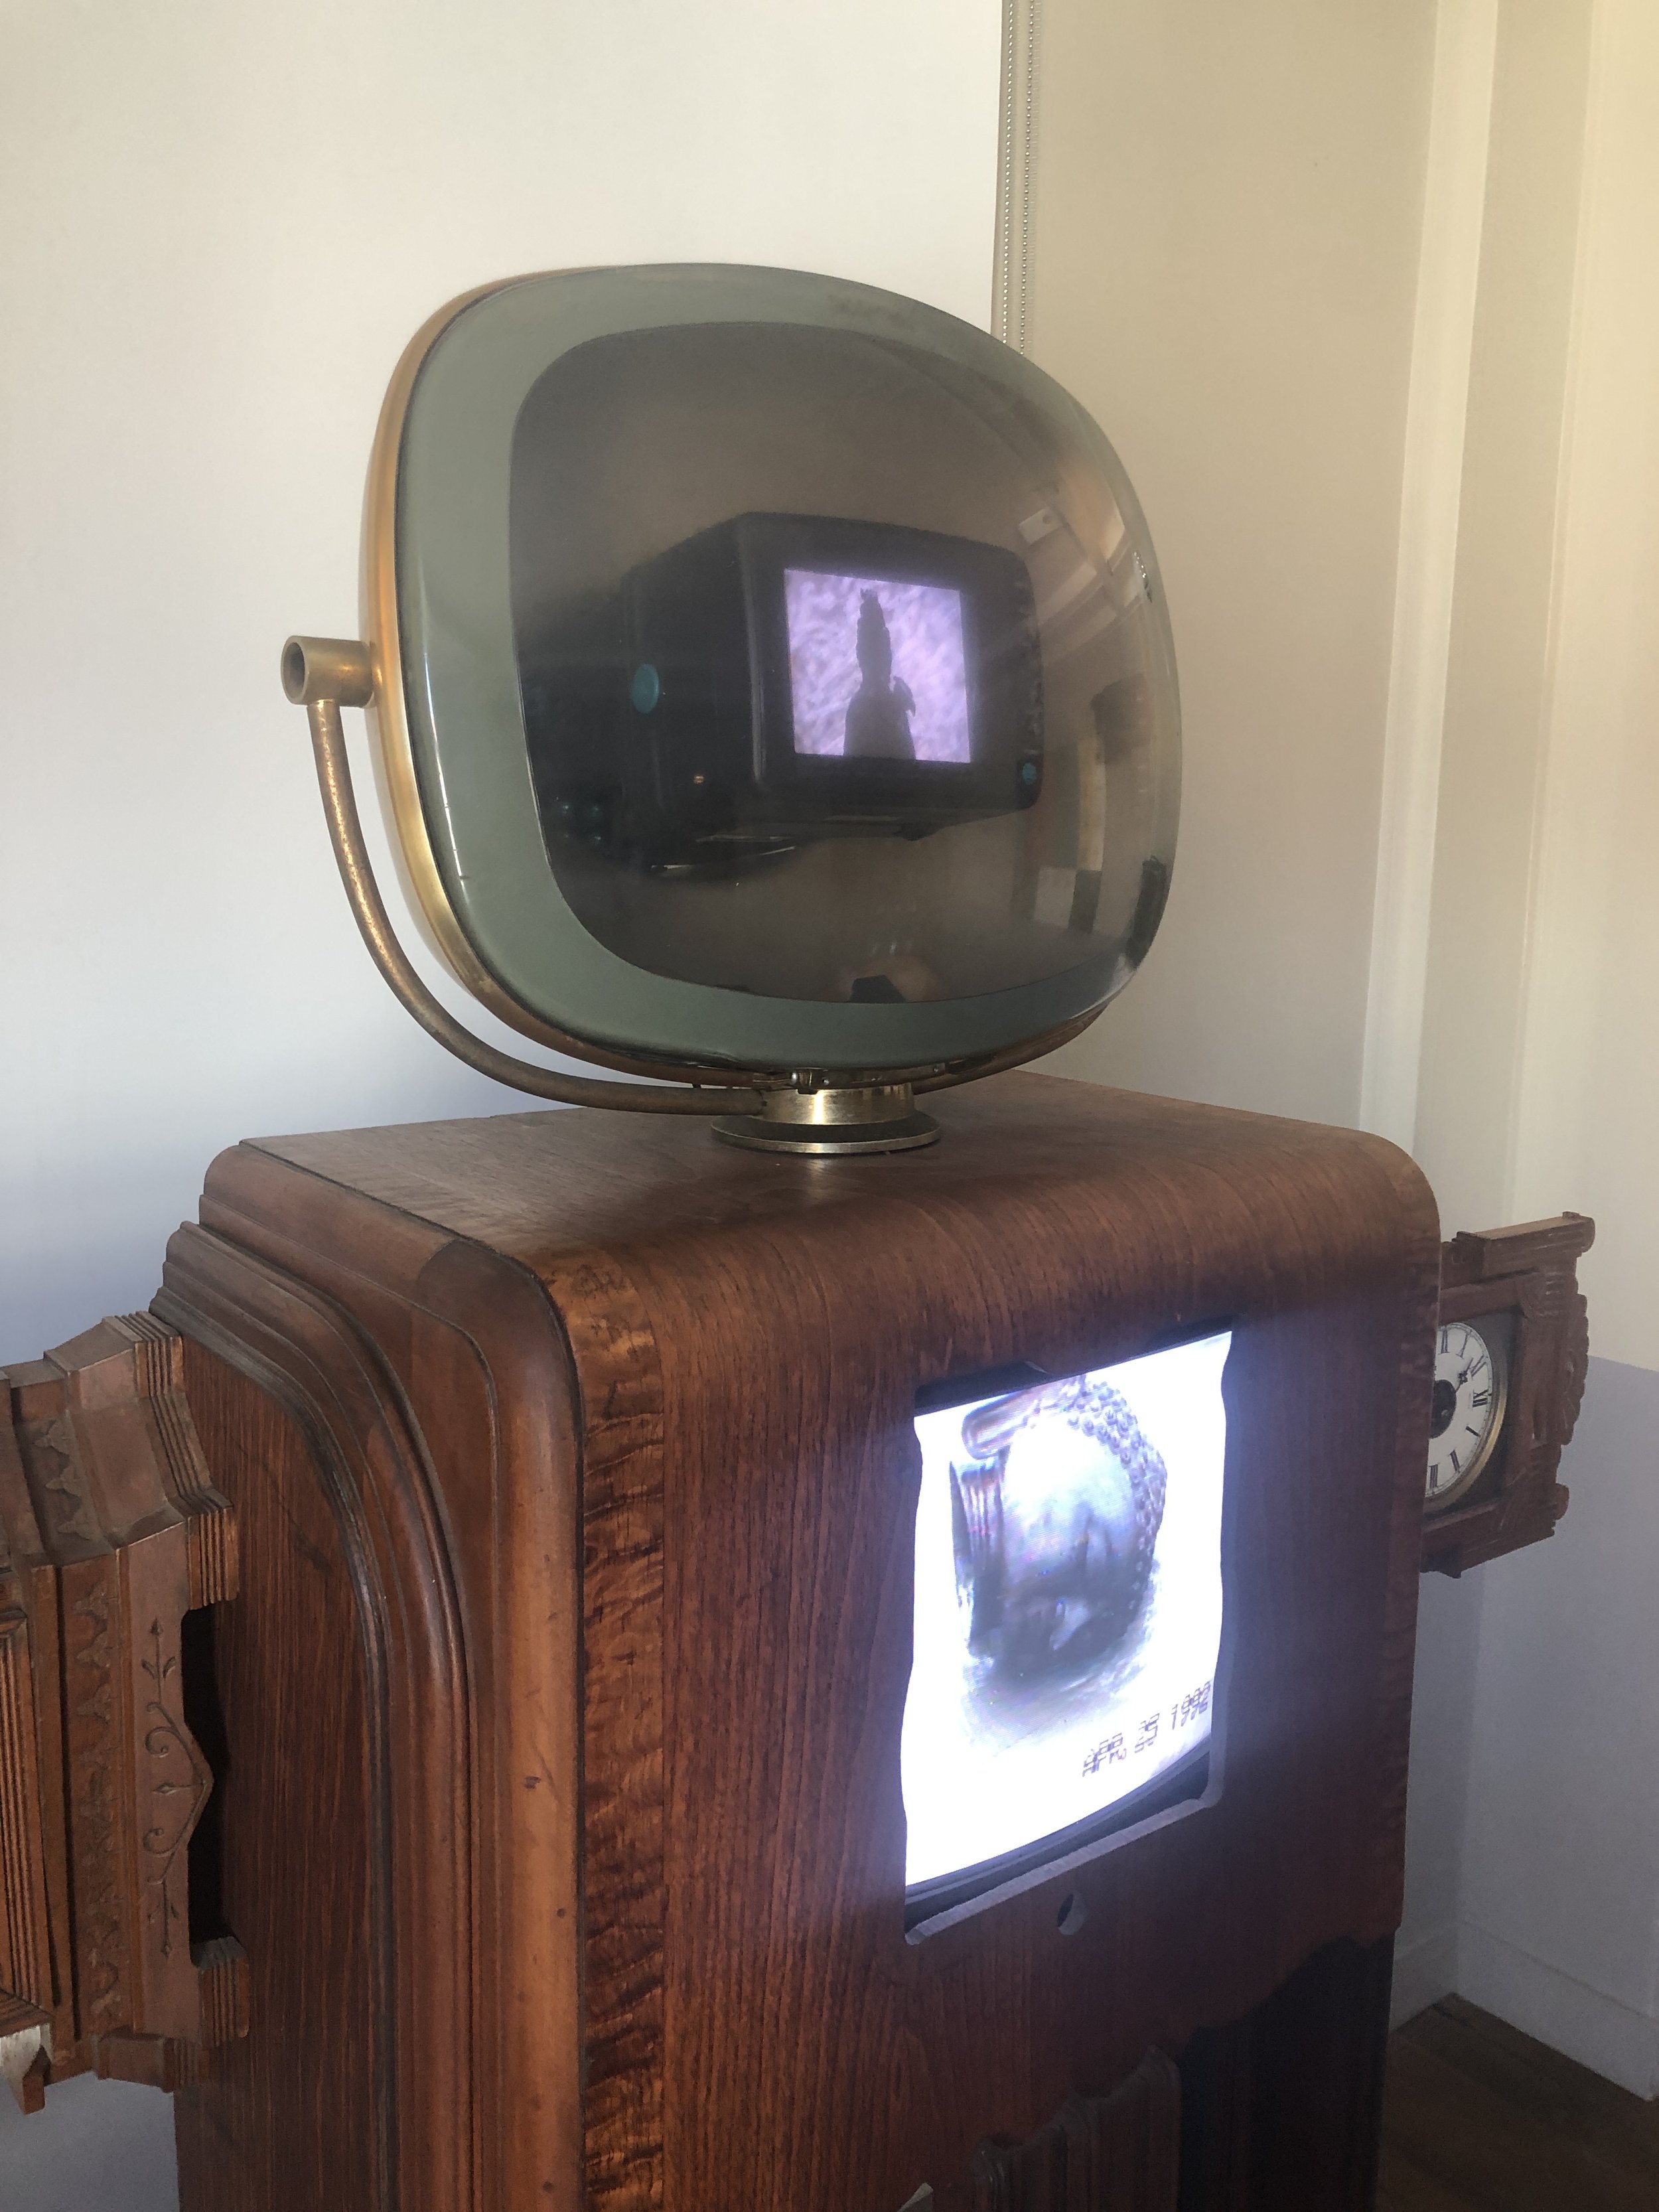  Nam June Paik,  Clock Arms Robot , 1995. Antique TV cabinet, antique clocks, two channel video and two video monitors. 72 x 61 x 21 inches.&nbsp;Installation at Felix Art Fair, 2020.  